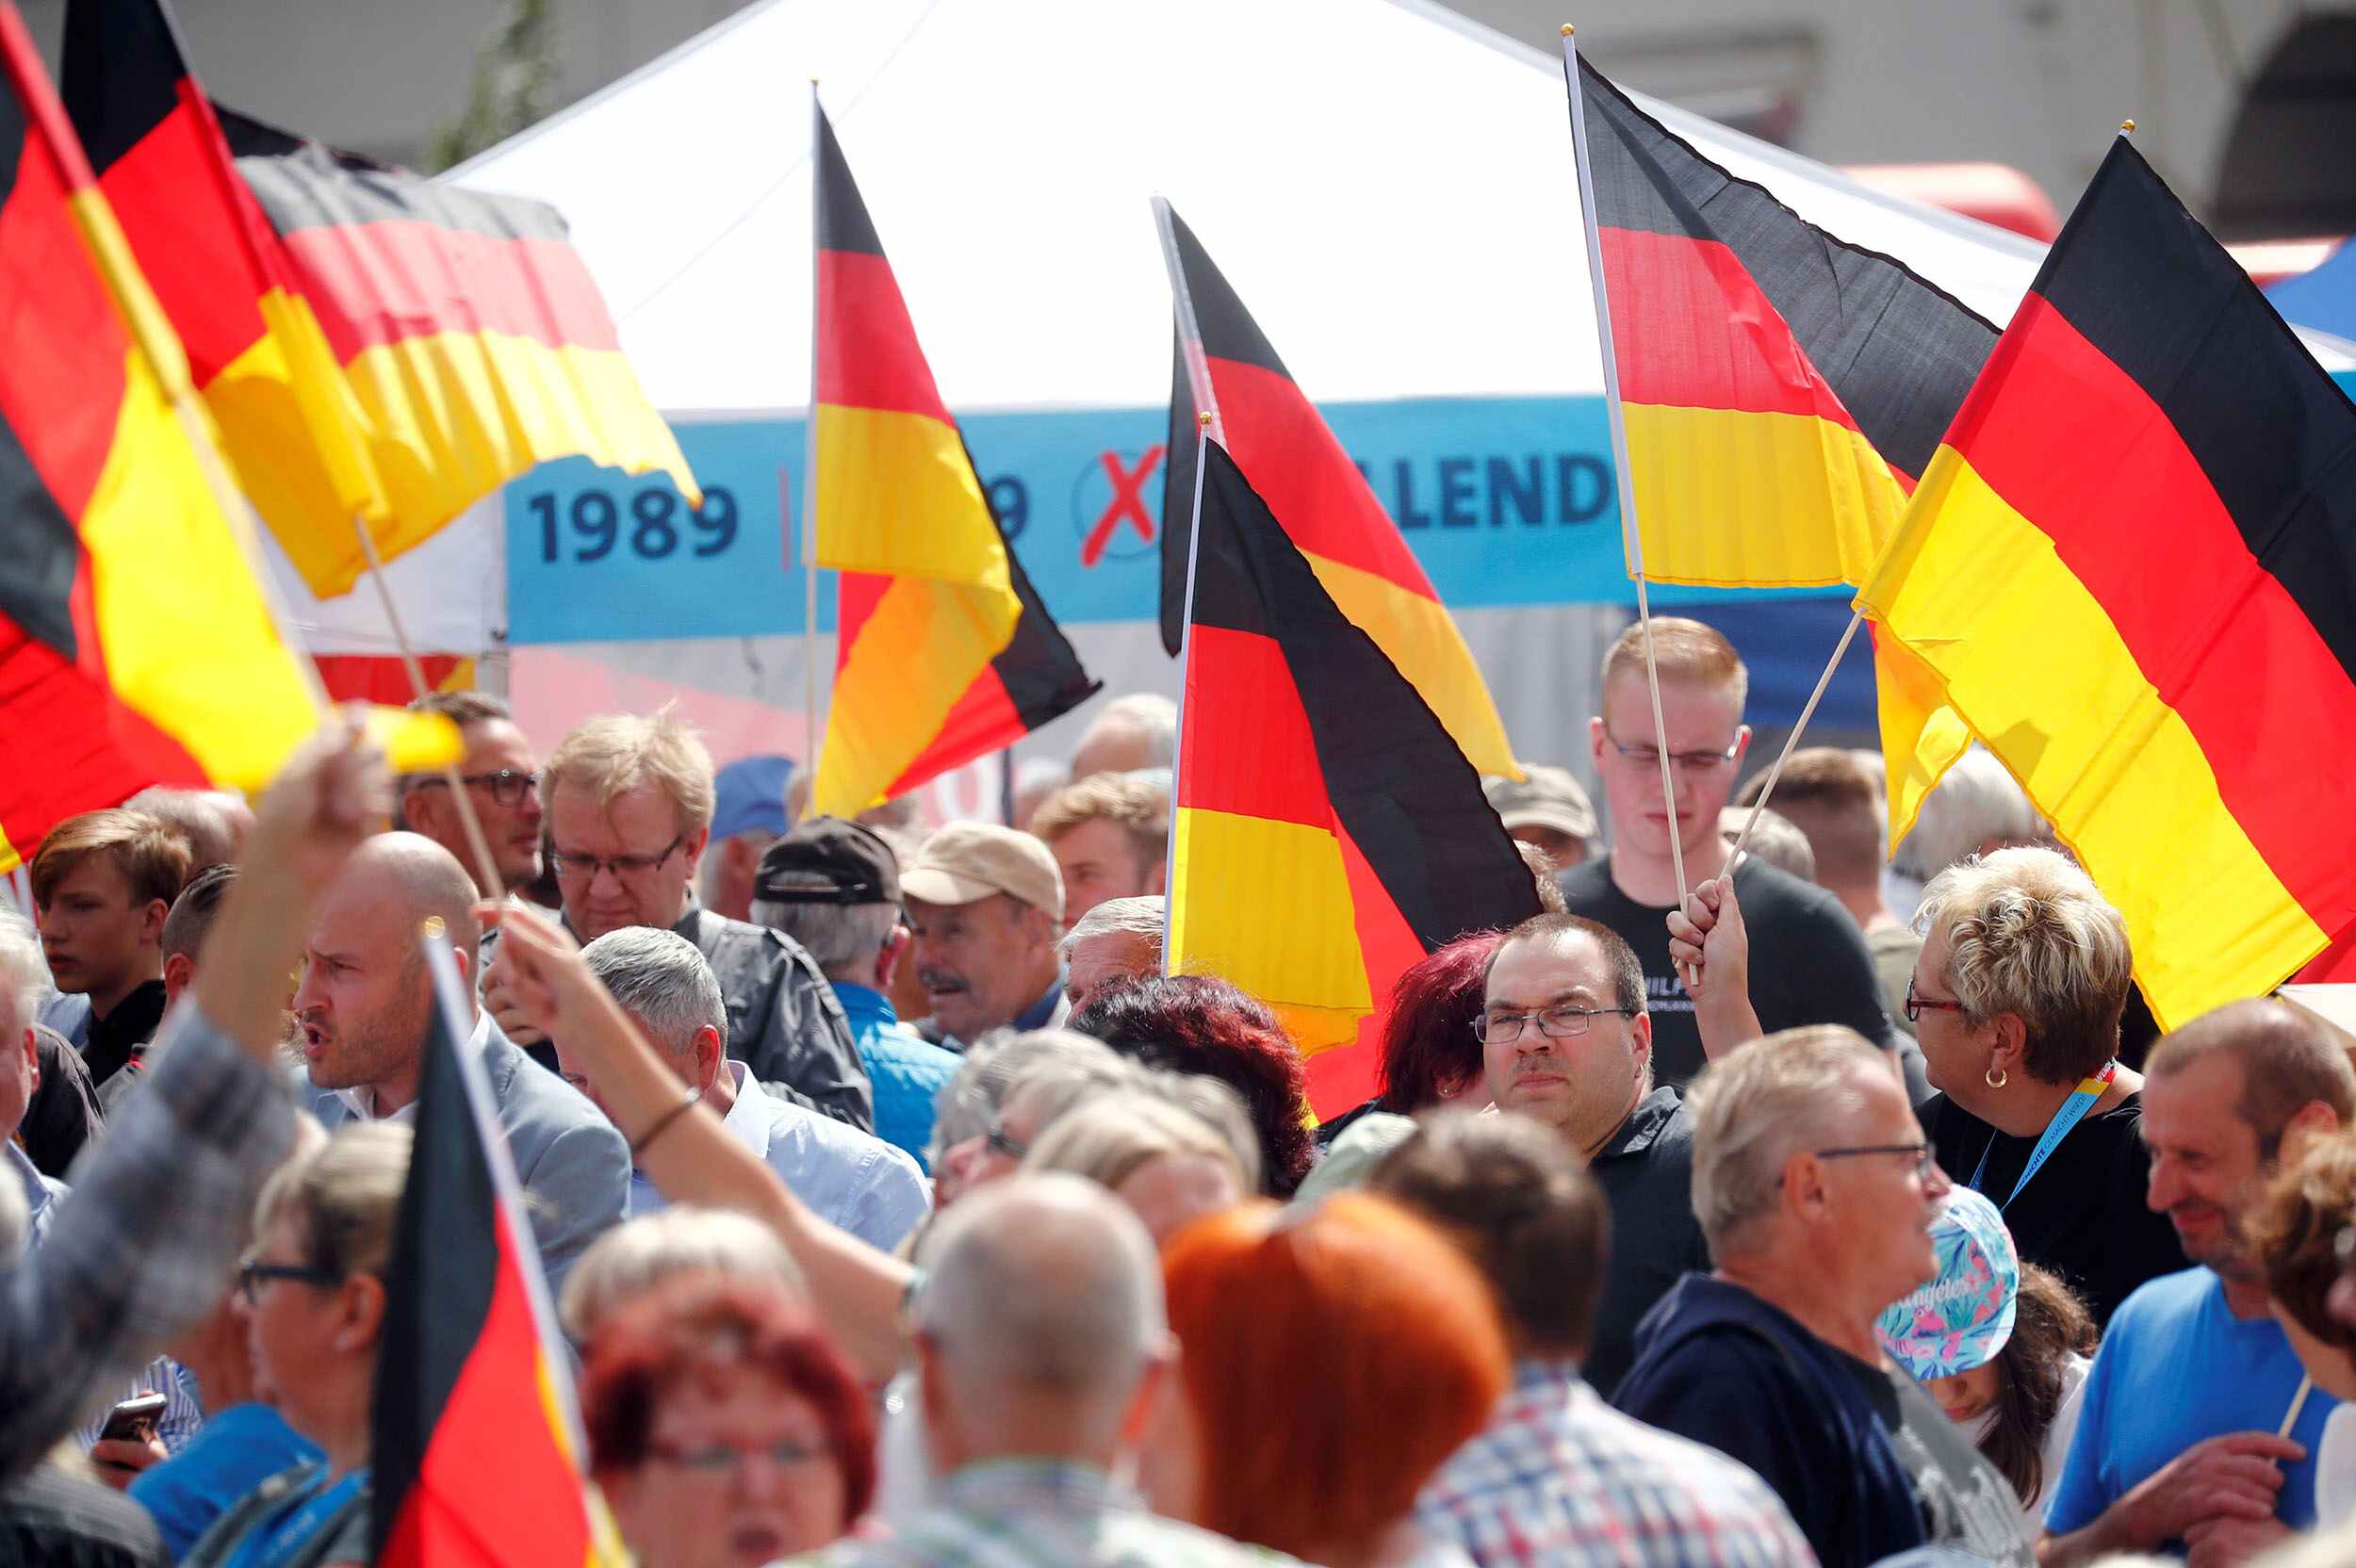 Hate crimes committed against Muslims in Germany are on the rise